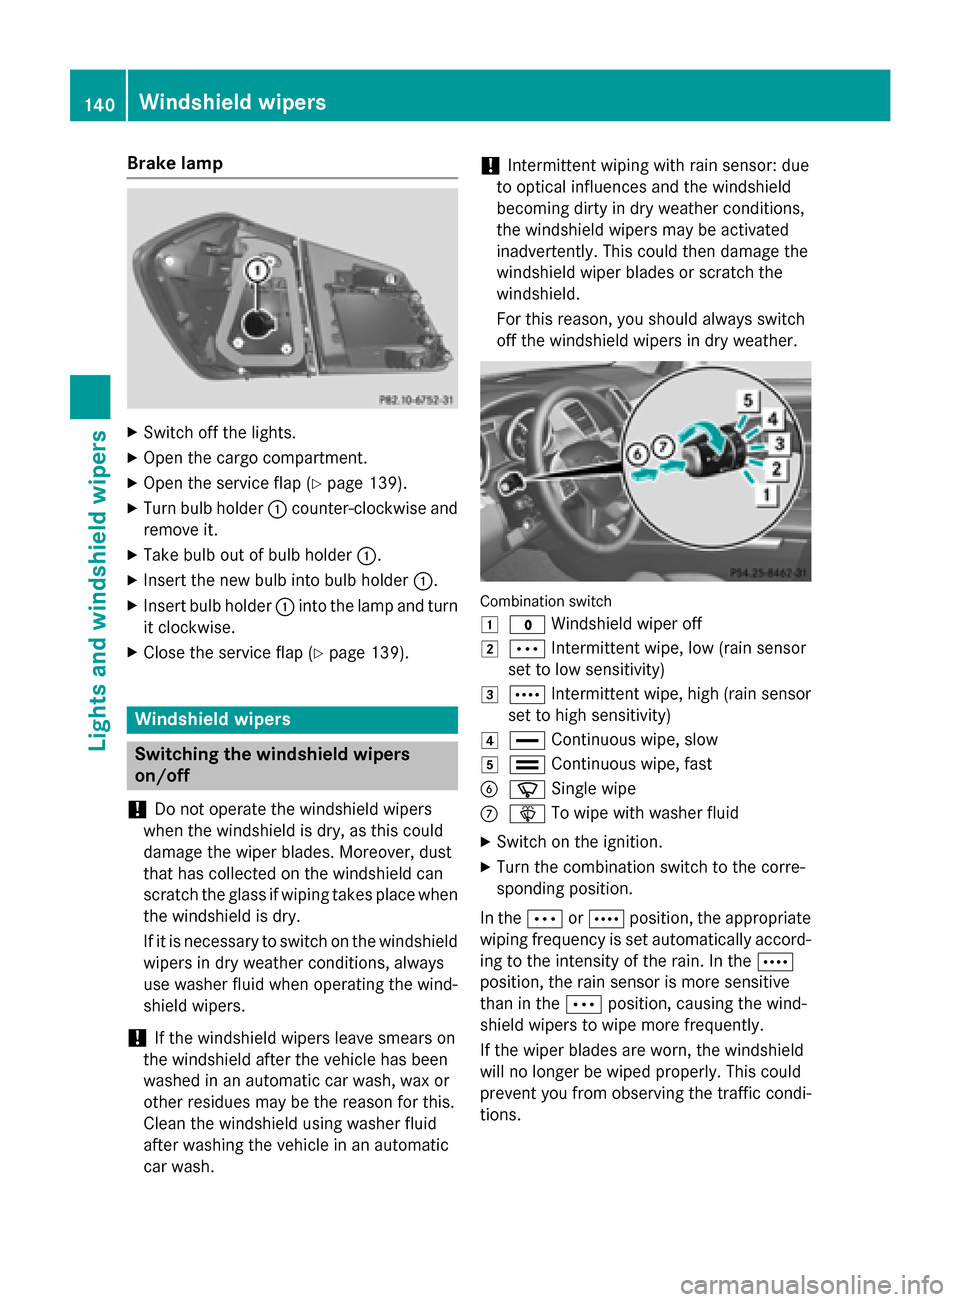 MERCEDES-BENZ GL-Class 2015 X166 User Guide Brake lamp
X
Switch off the lights.
X Open the cargo compartment.
X Open the service flap (Y page 139).
X Turn bulb holder 0043counter-clockwise and
remove it.
X Take bulb out of bulb holder 0043.
X I